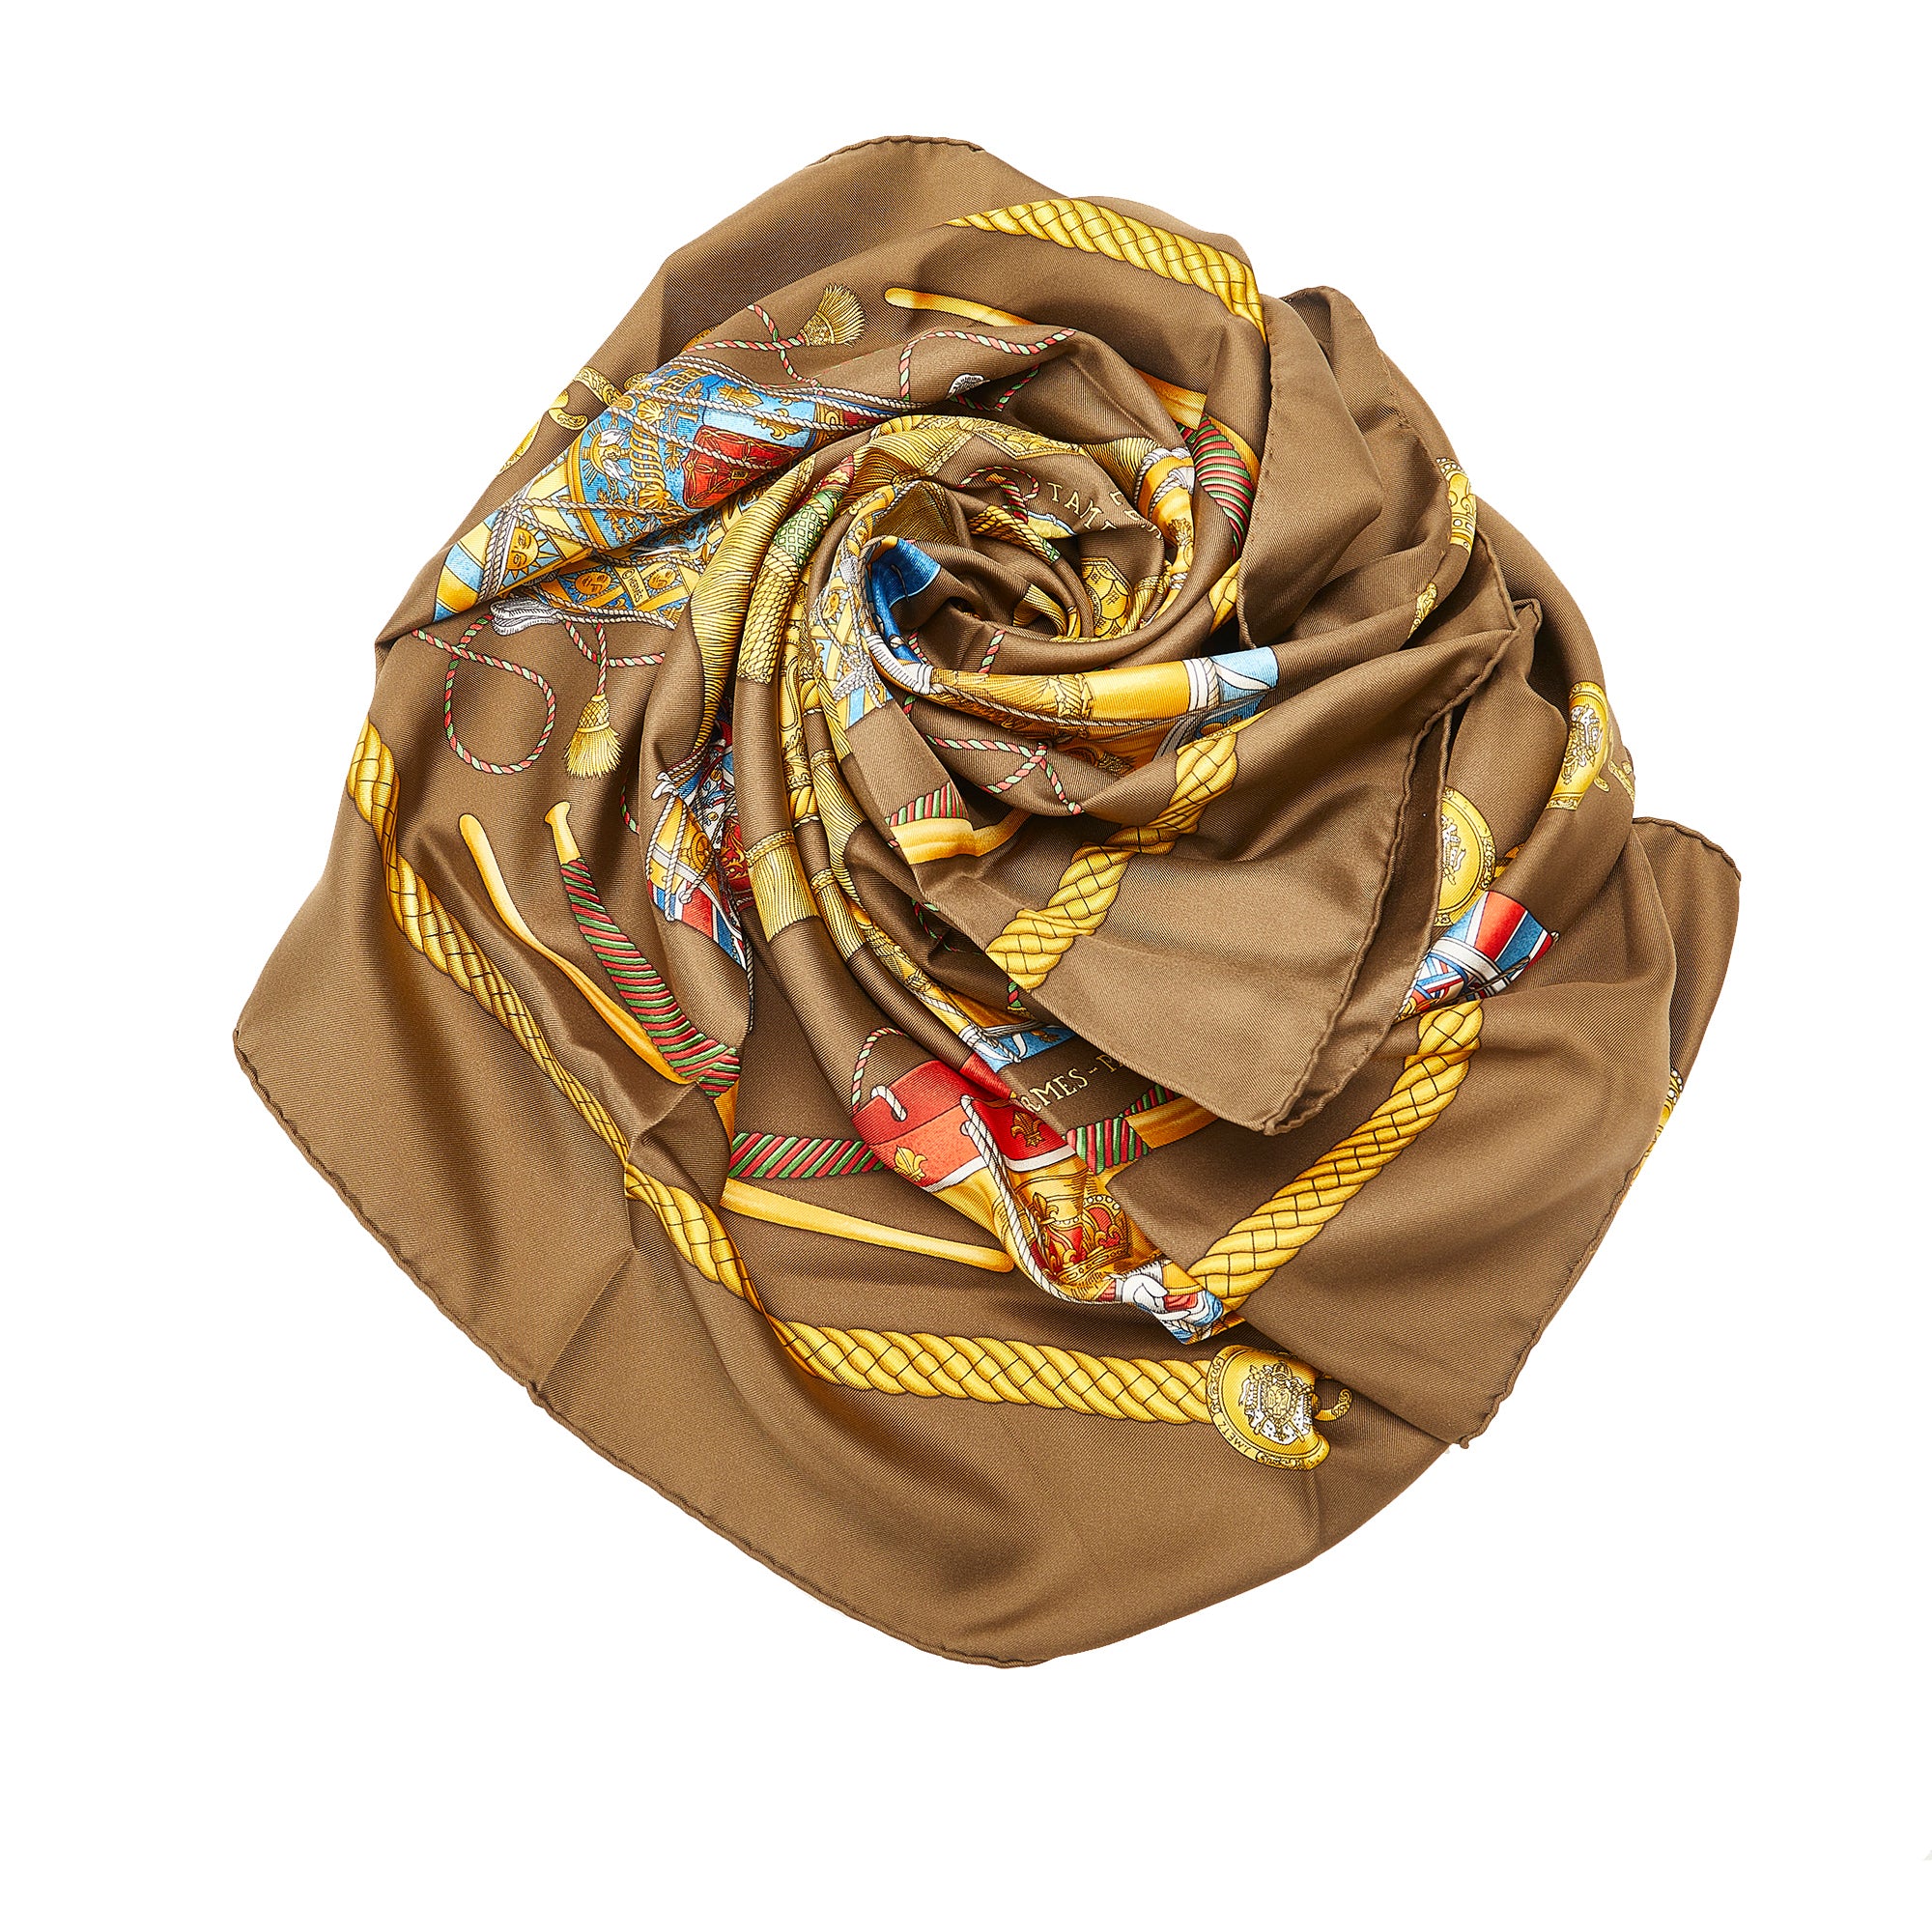 Louis Vuitton - Authenticated Scarf - Silk Brown for Women, Very Good Condition